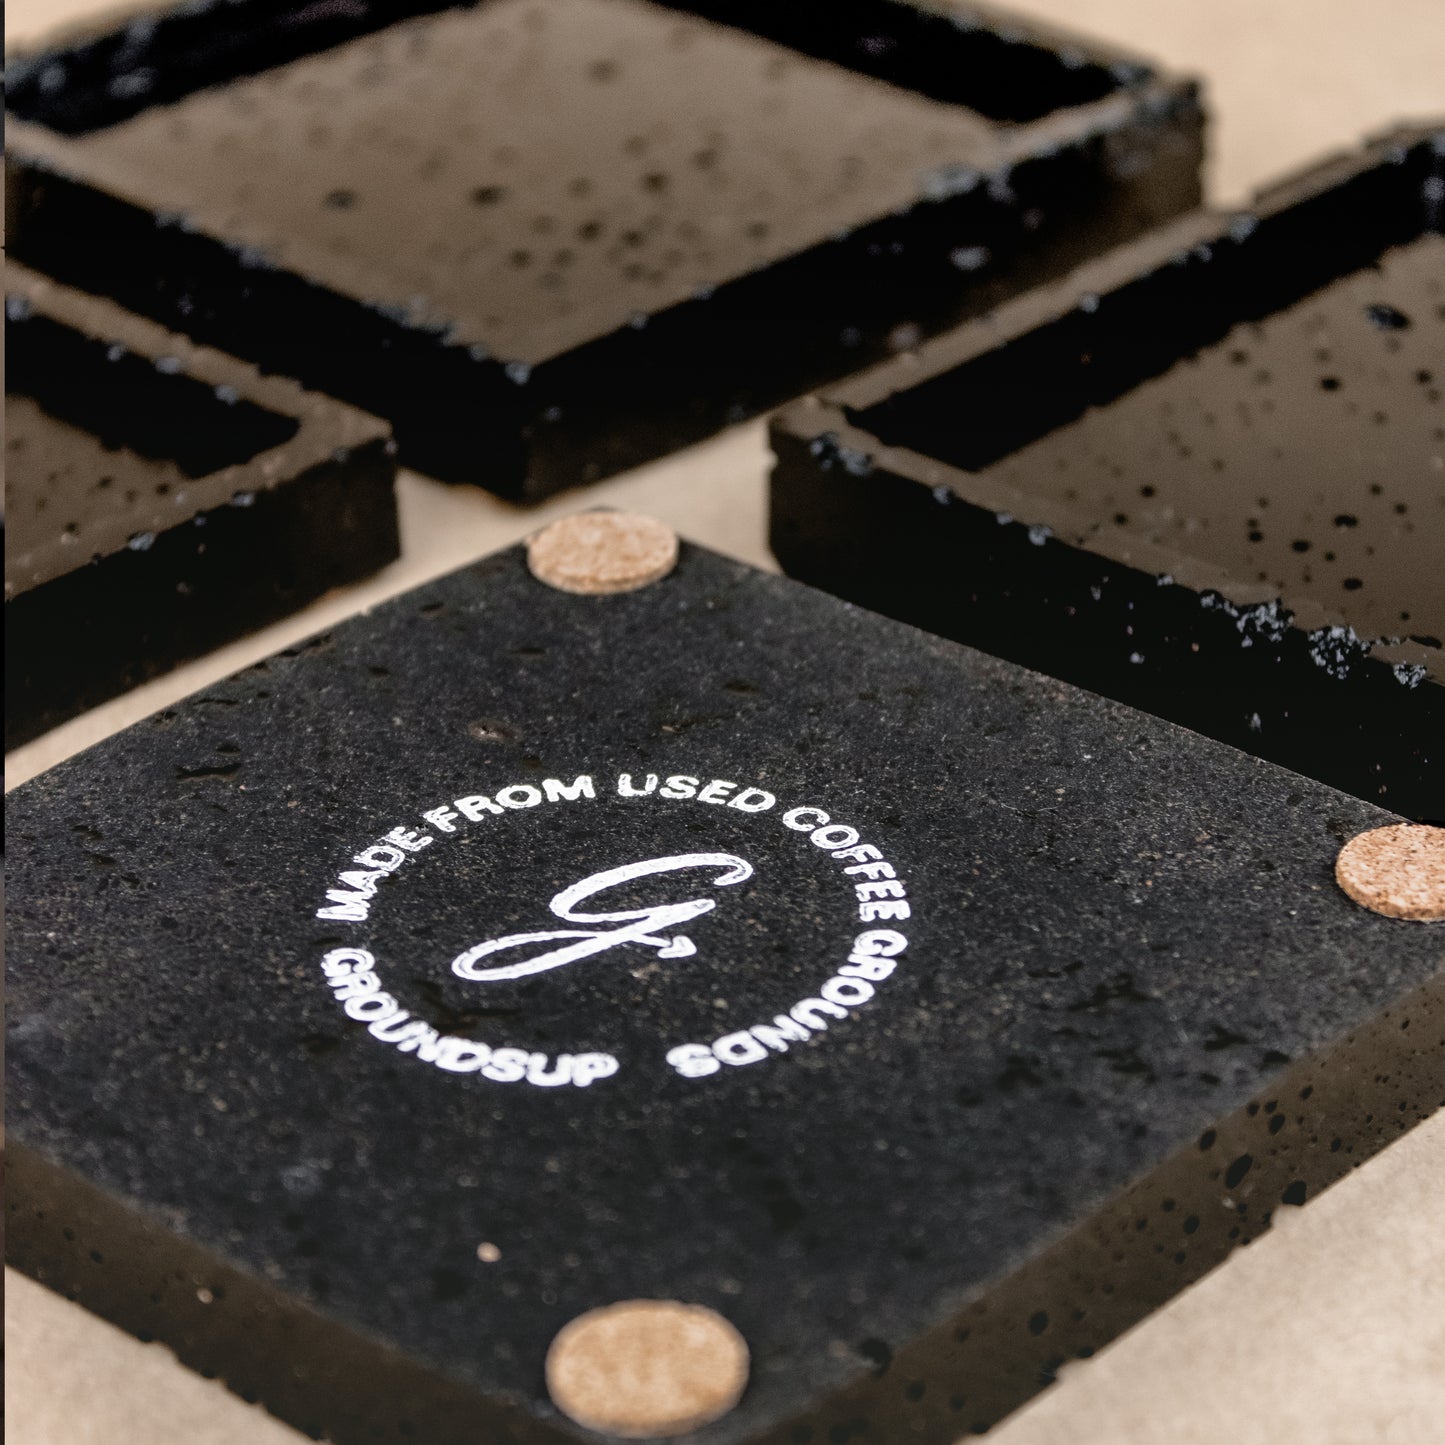 Sustainable coffee coasters made with used coffee grounds